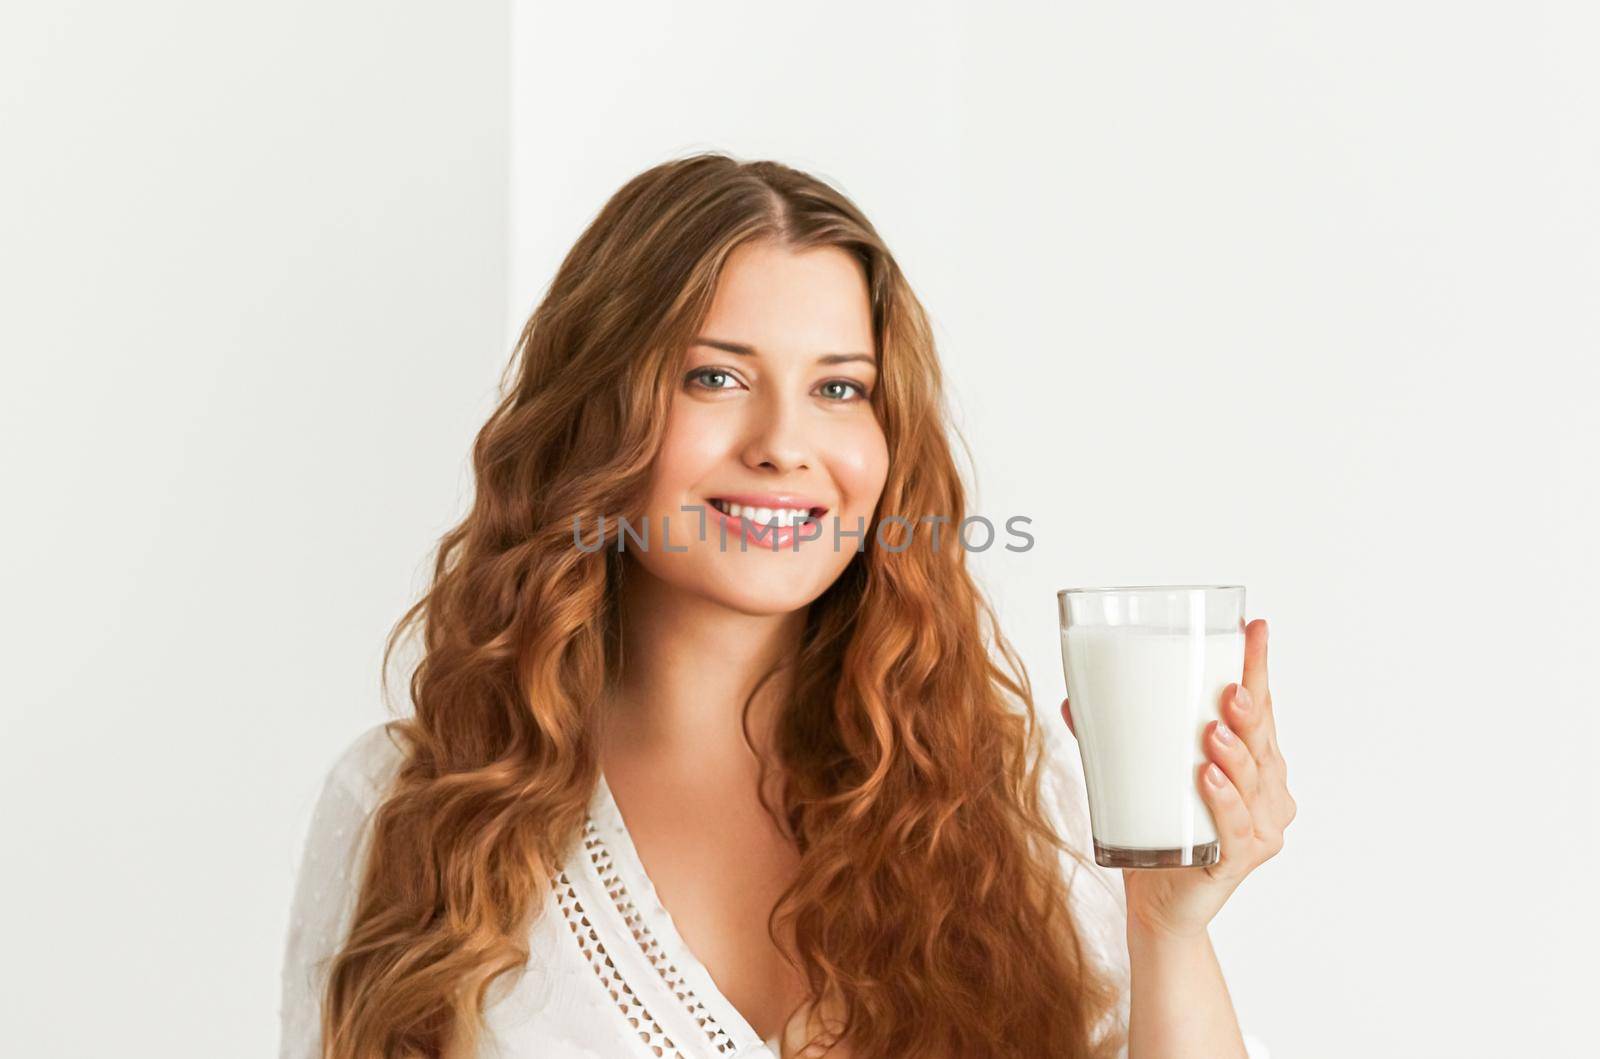 Diet, health and wellness concept, woman holding glass of milk or protein shake cocktail